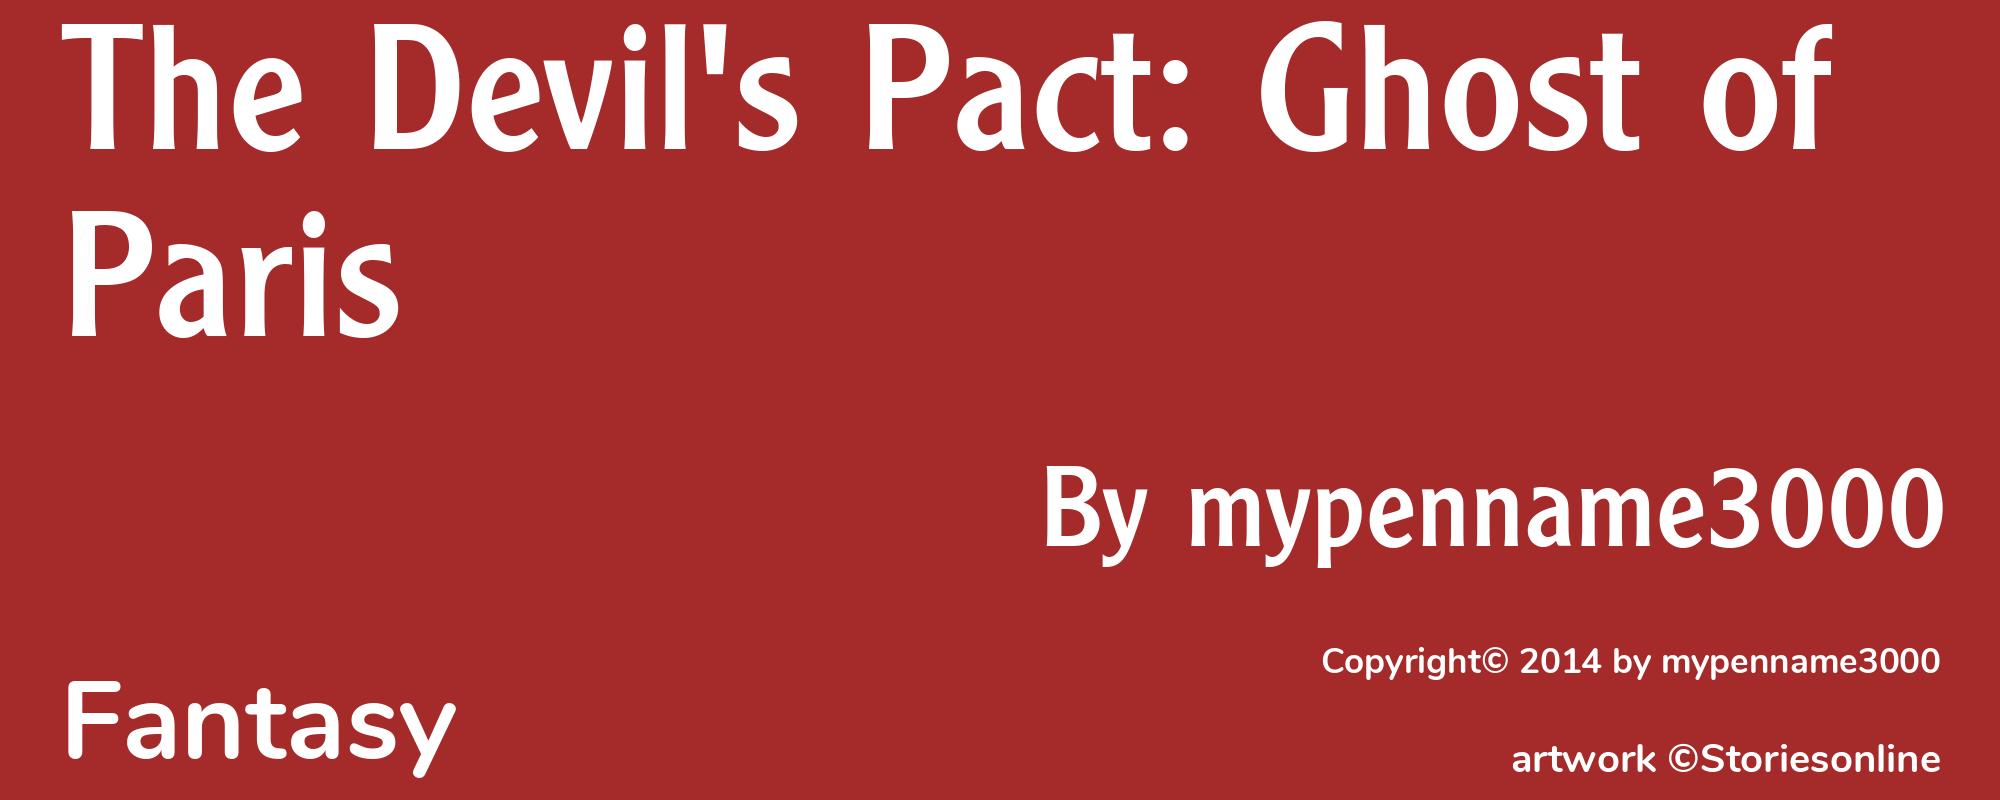 The Devil's Pact: Ghost of Paris - Cover